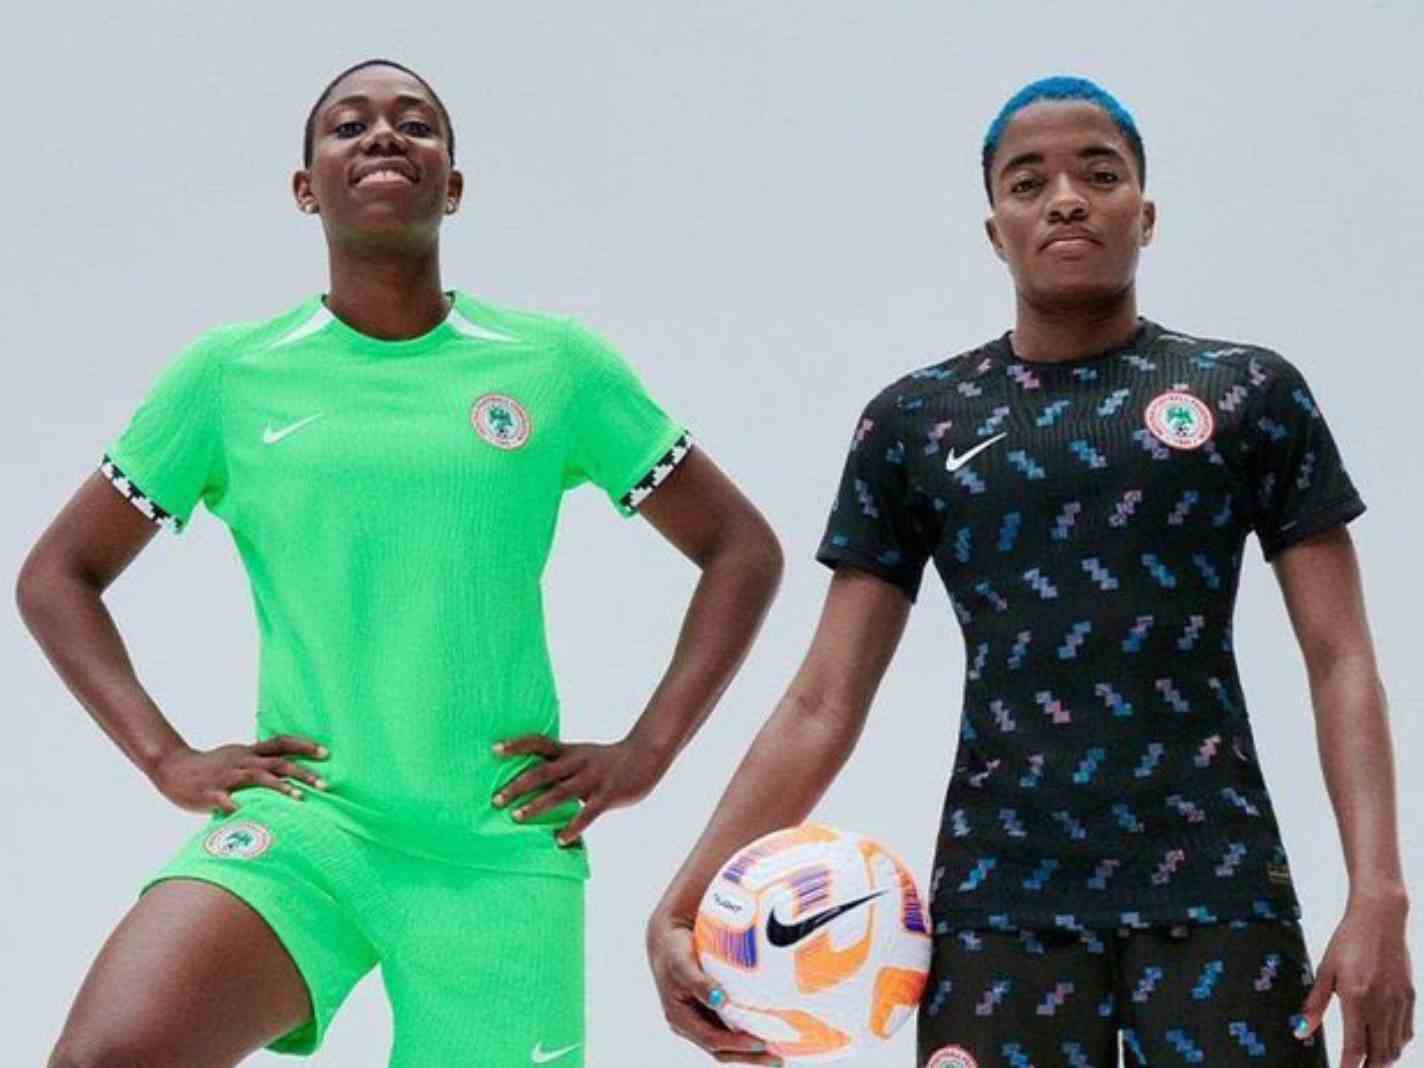 The New Nike Kits For Upcoming Women’s World Cup Are A Mixed Bag